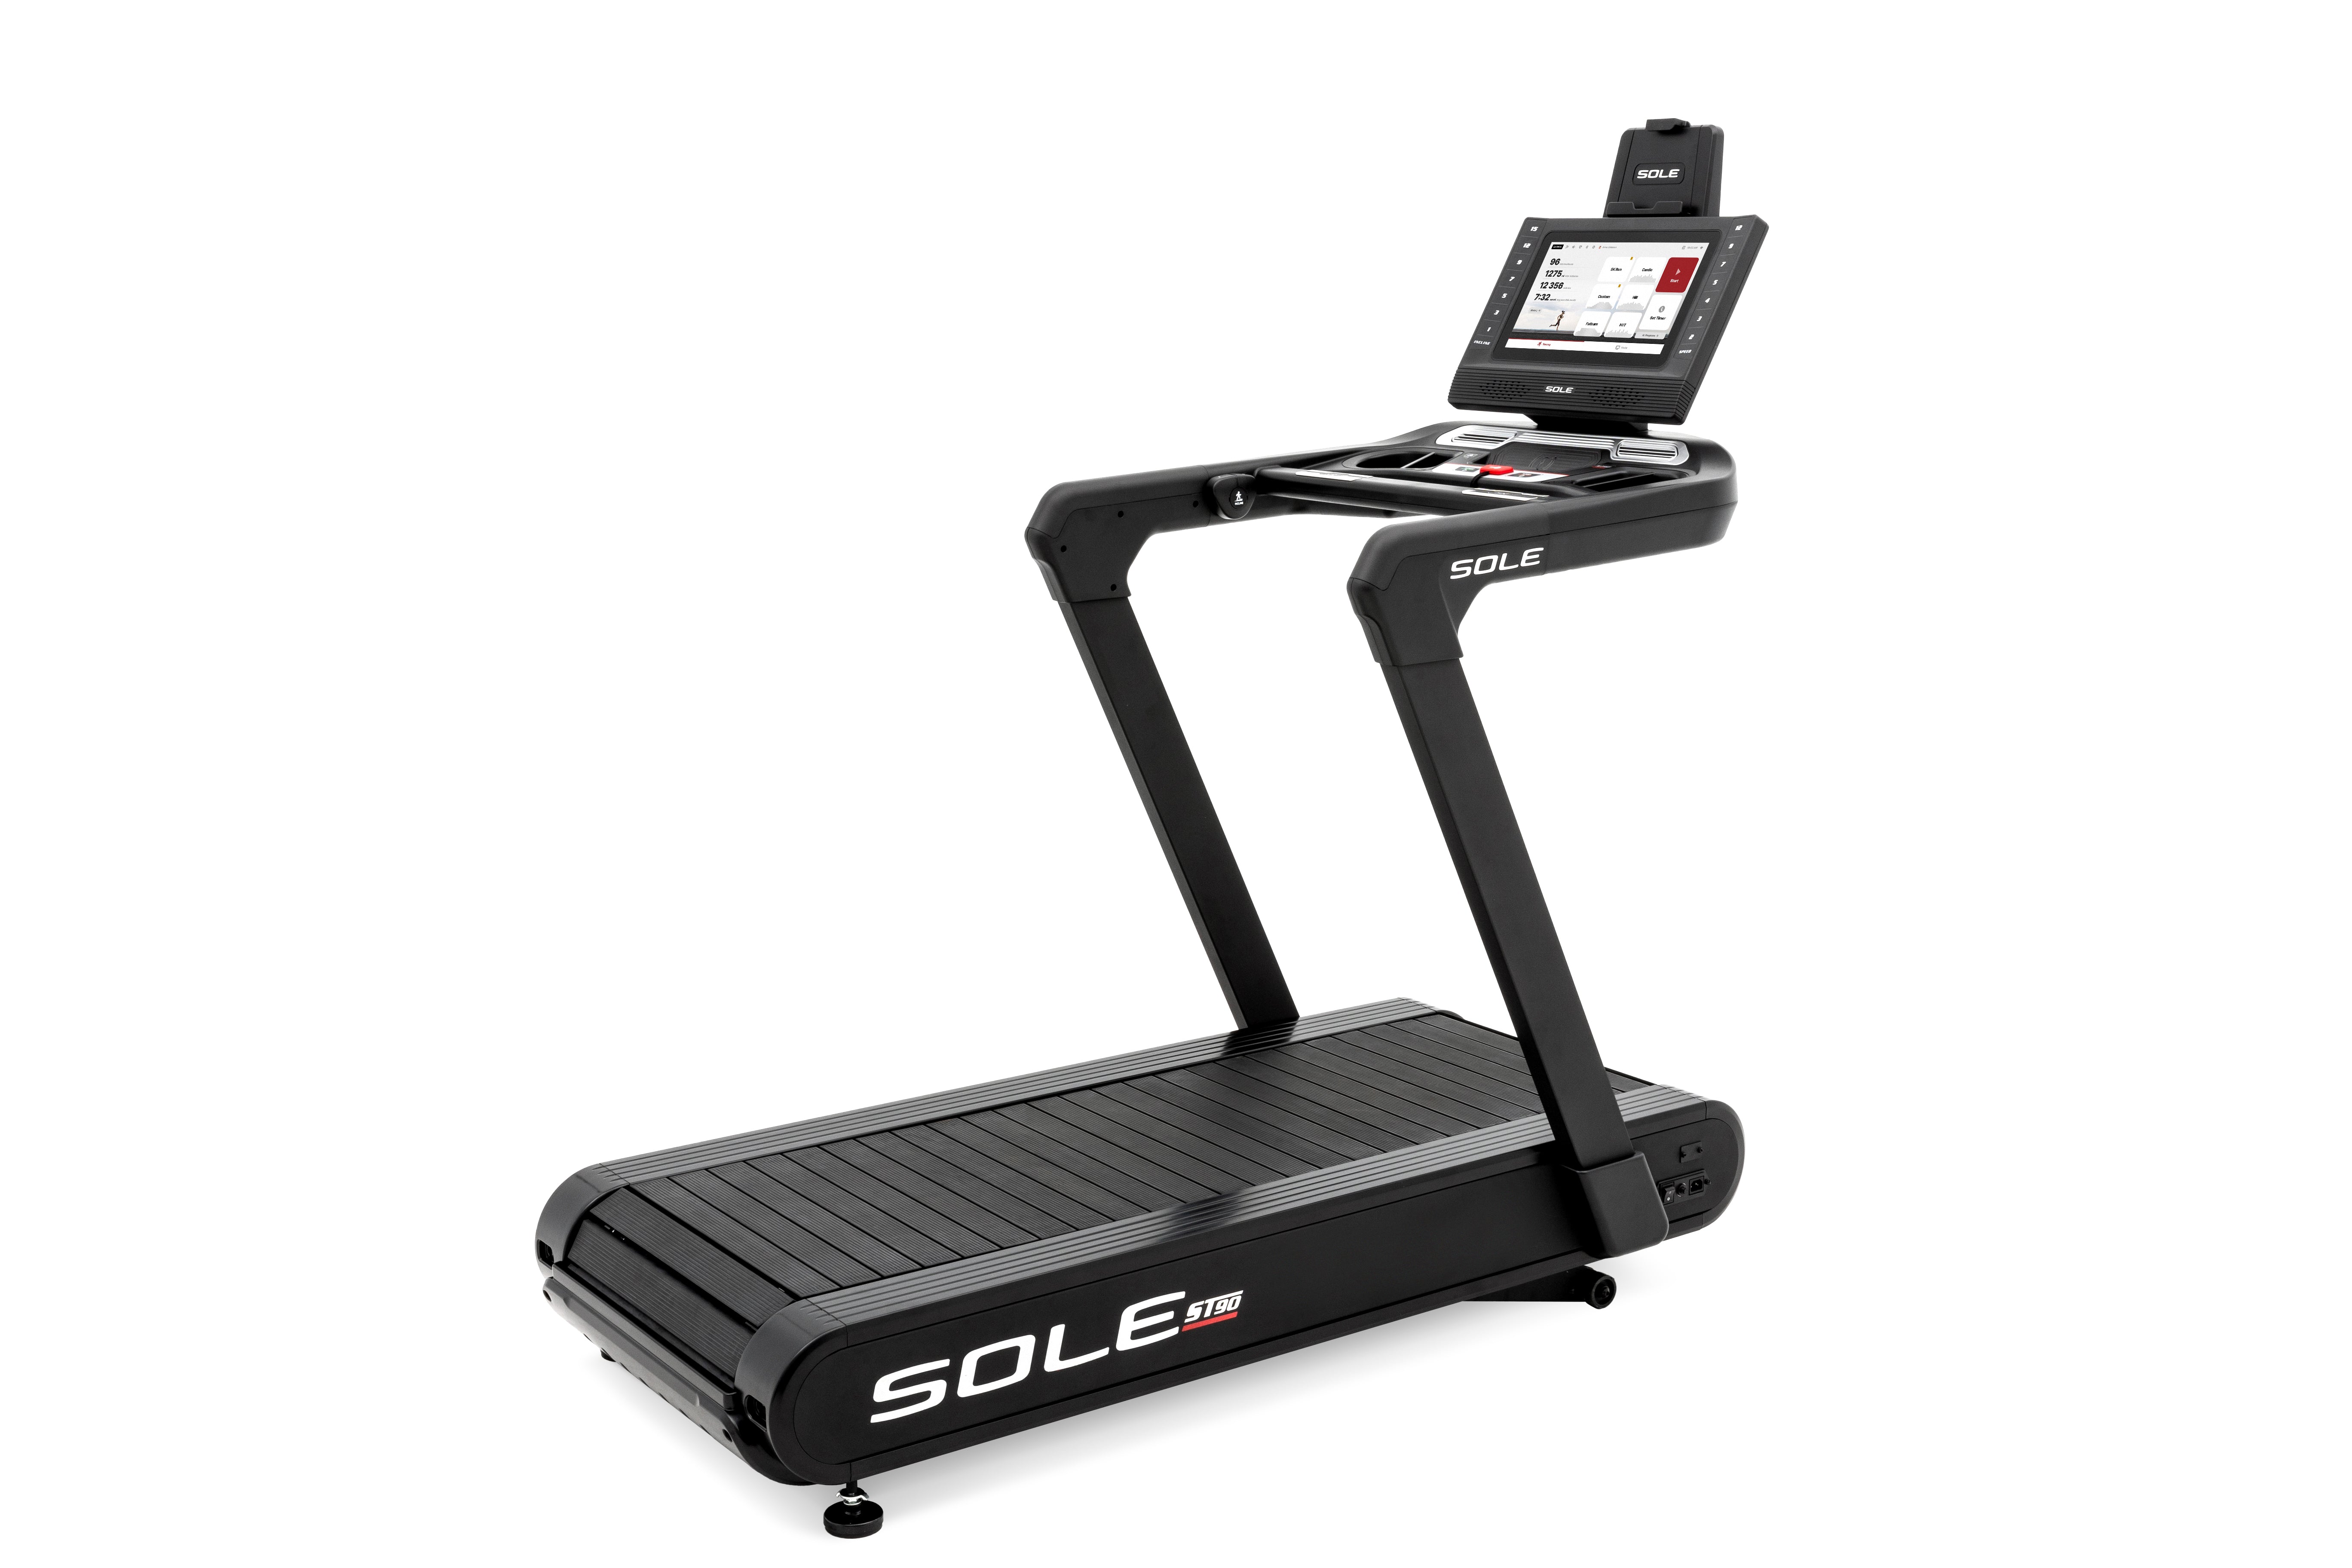 Side view of the Sole ST90 treadmill featuring a digital console with a touchscreen display, sturdy handlebars, and a black running belt with the Sole ST90 logo, set against a white background.